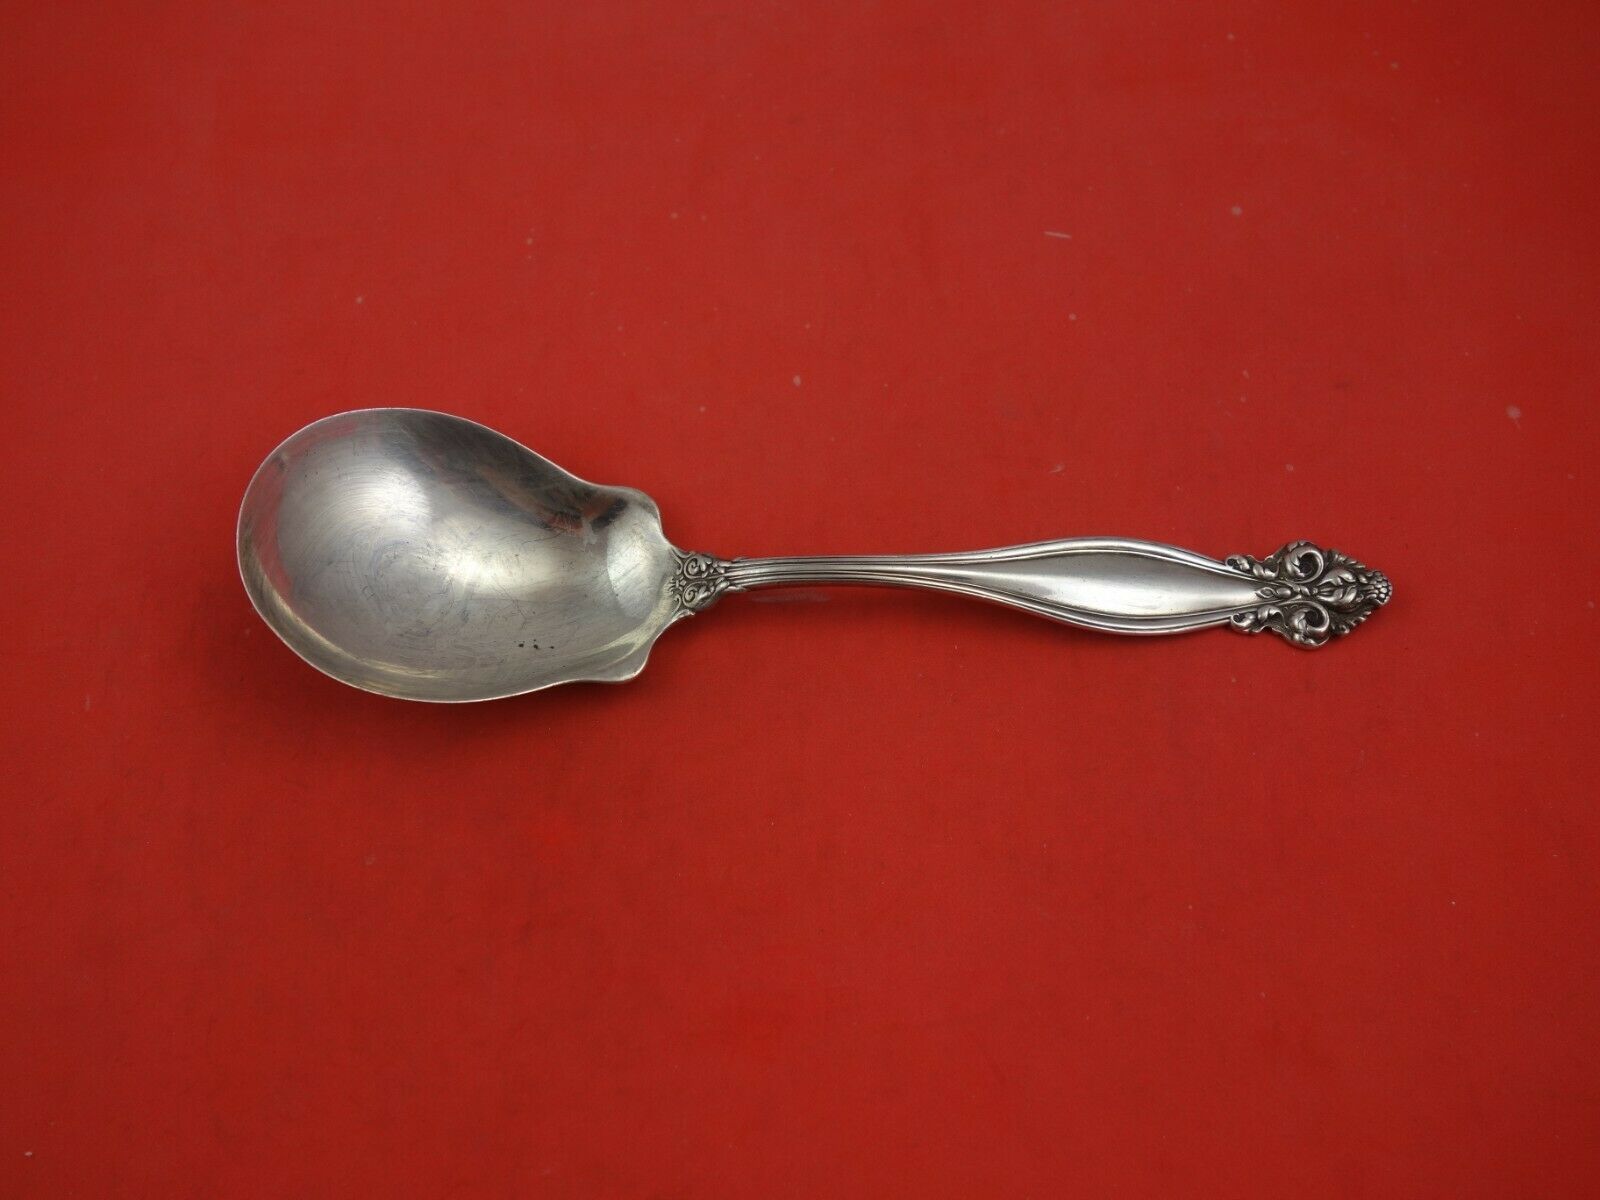 Primary image for Jeanne D' Arc by International Sterling Silver Berry Spoon 8 3/4" Vintage Server